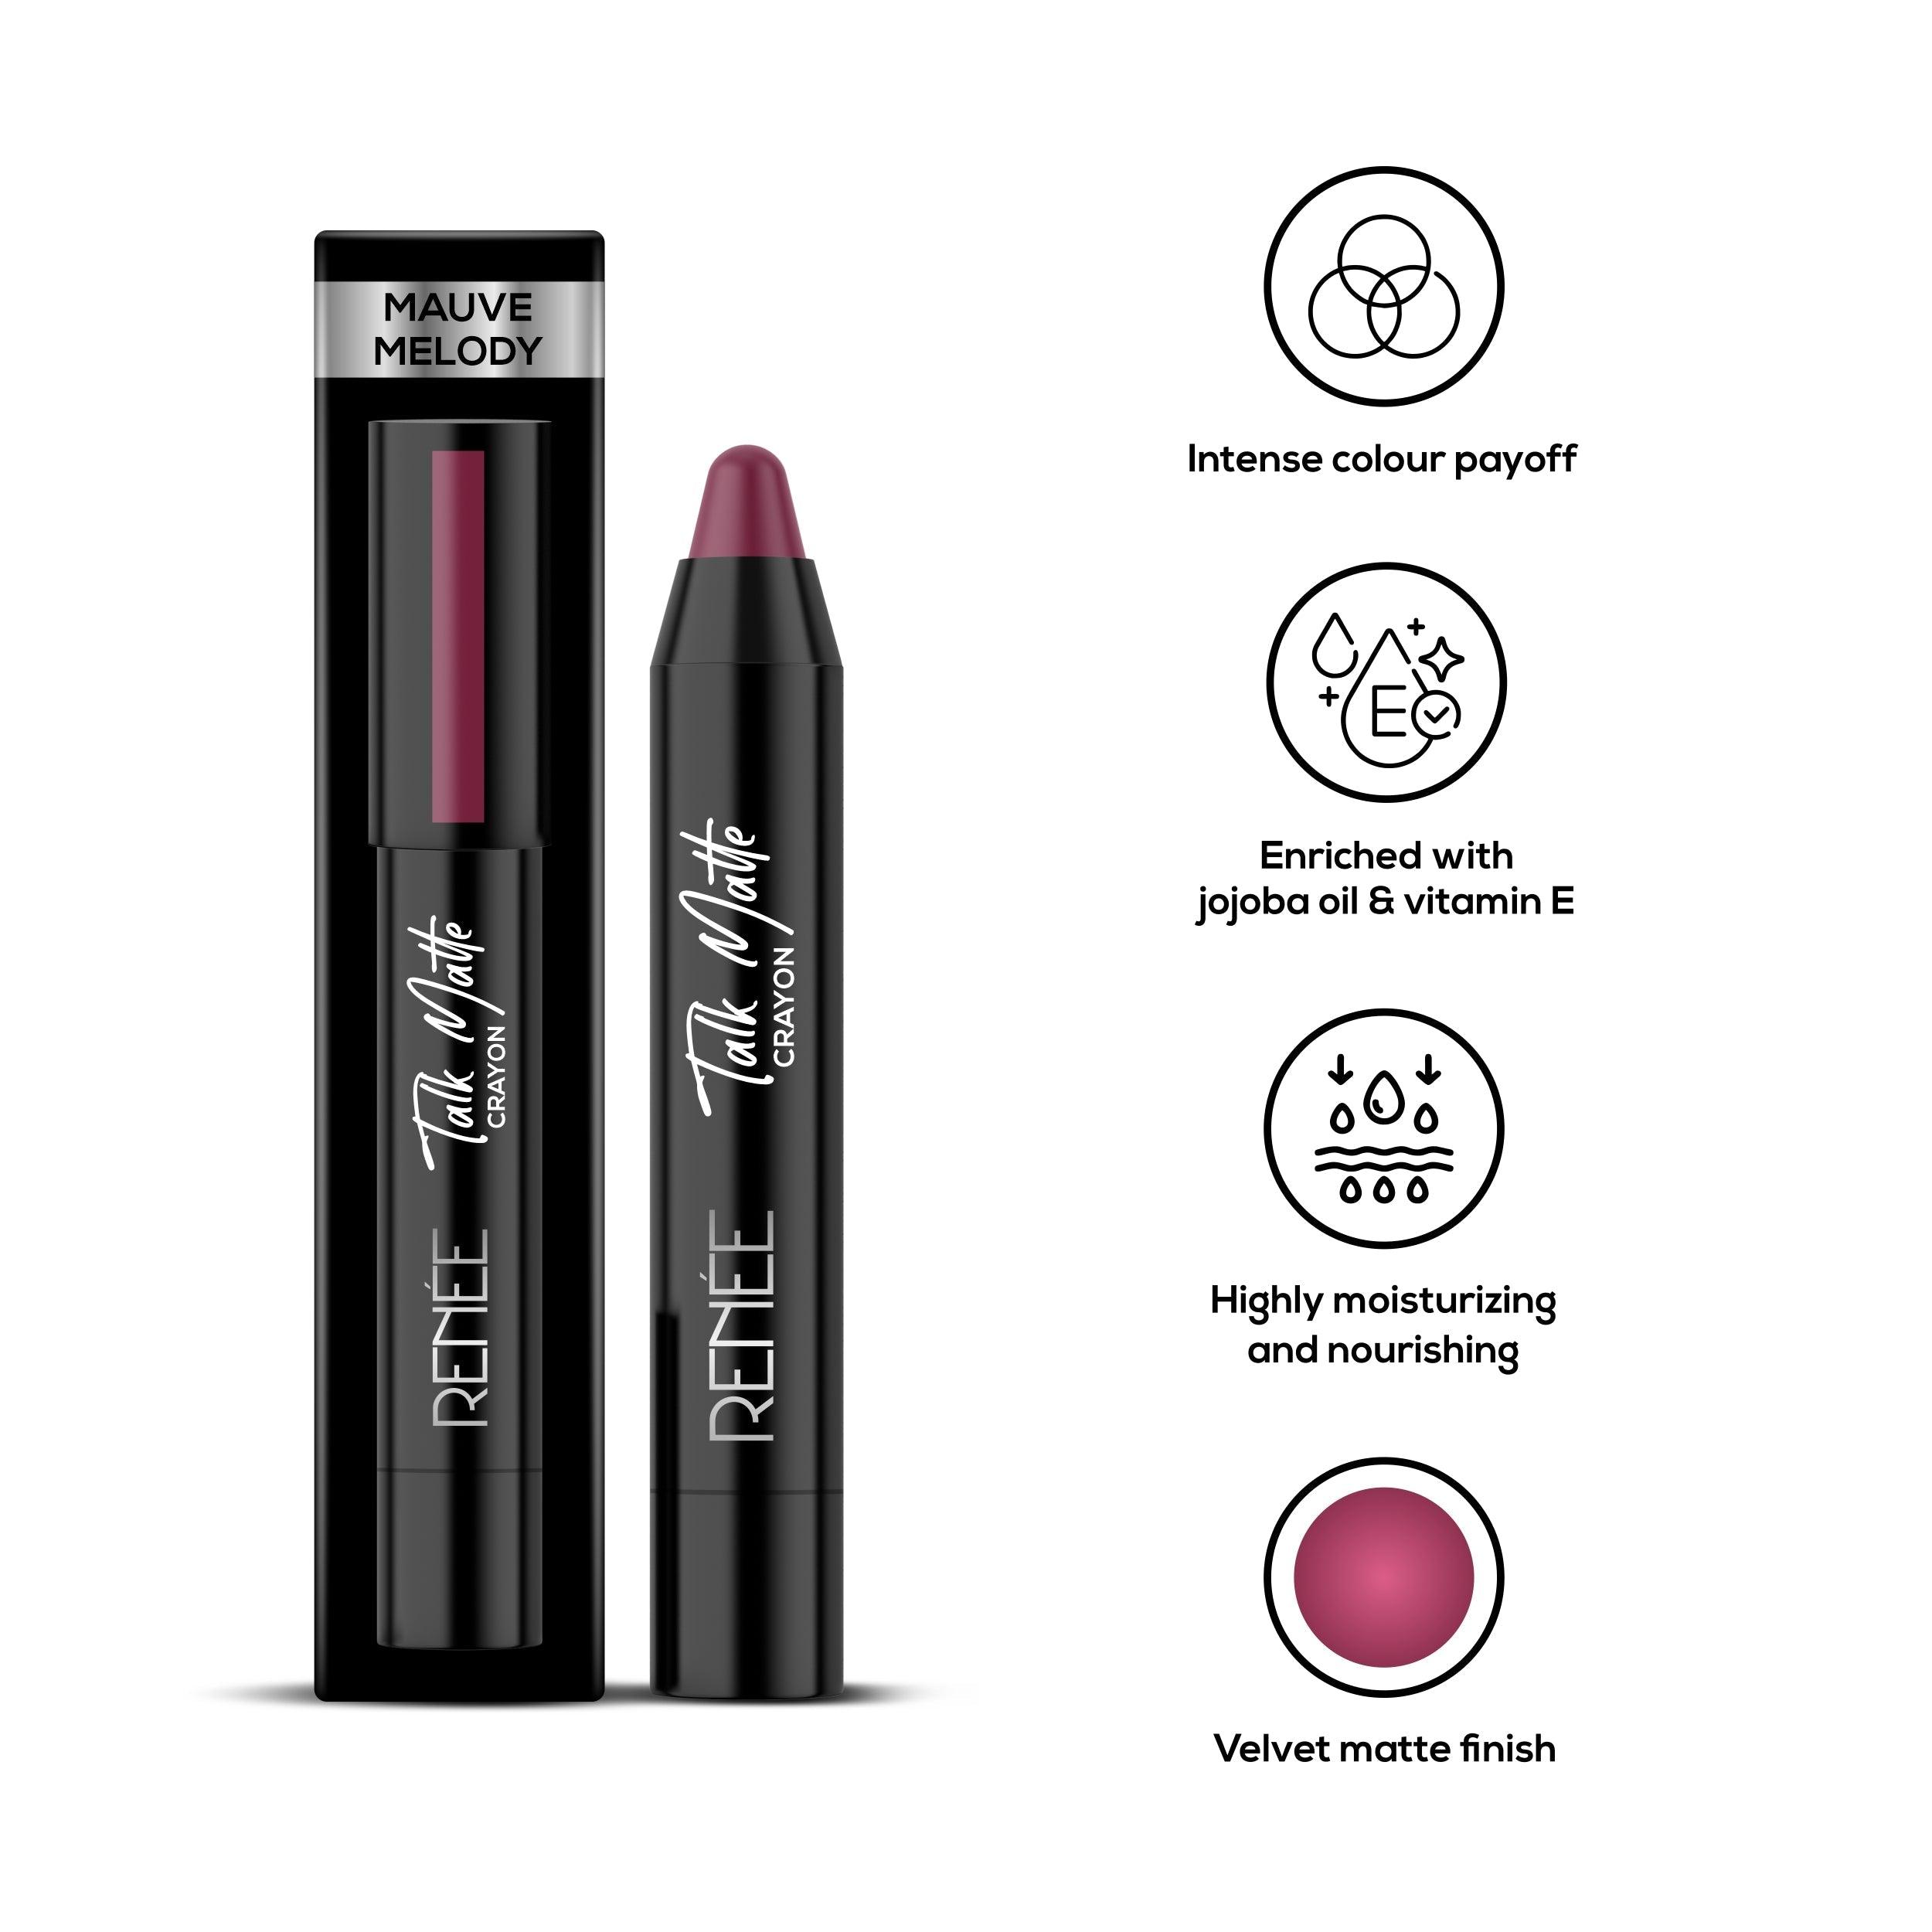 RENEE Talk Matte Duo with Mauve Melody & Pink Thunder, 4.5gm each - Renee Cosmetics